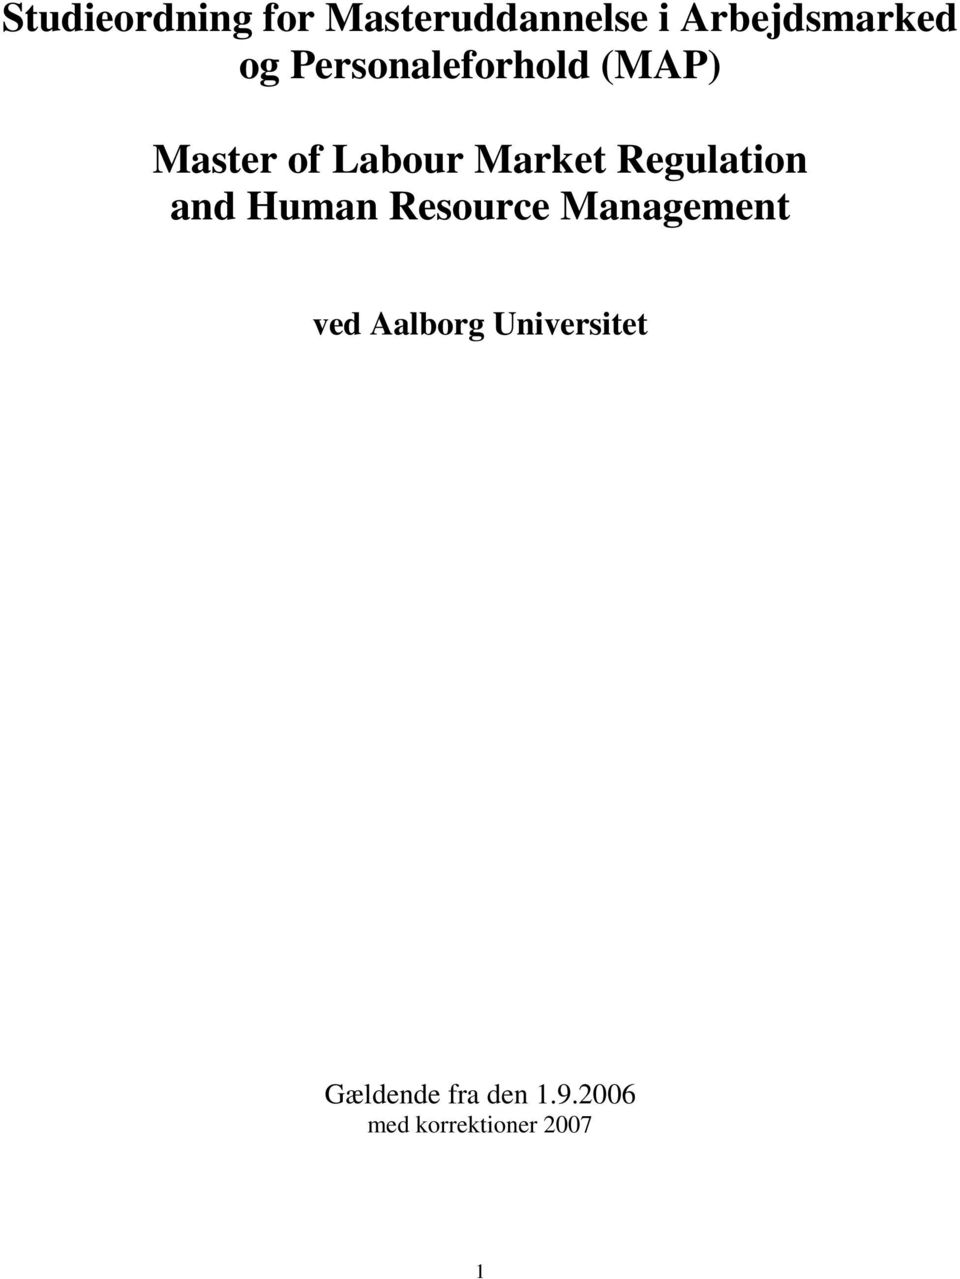 Regulation and Human Resource Management ved Aalborg